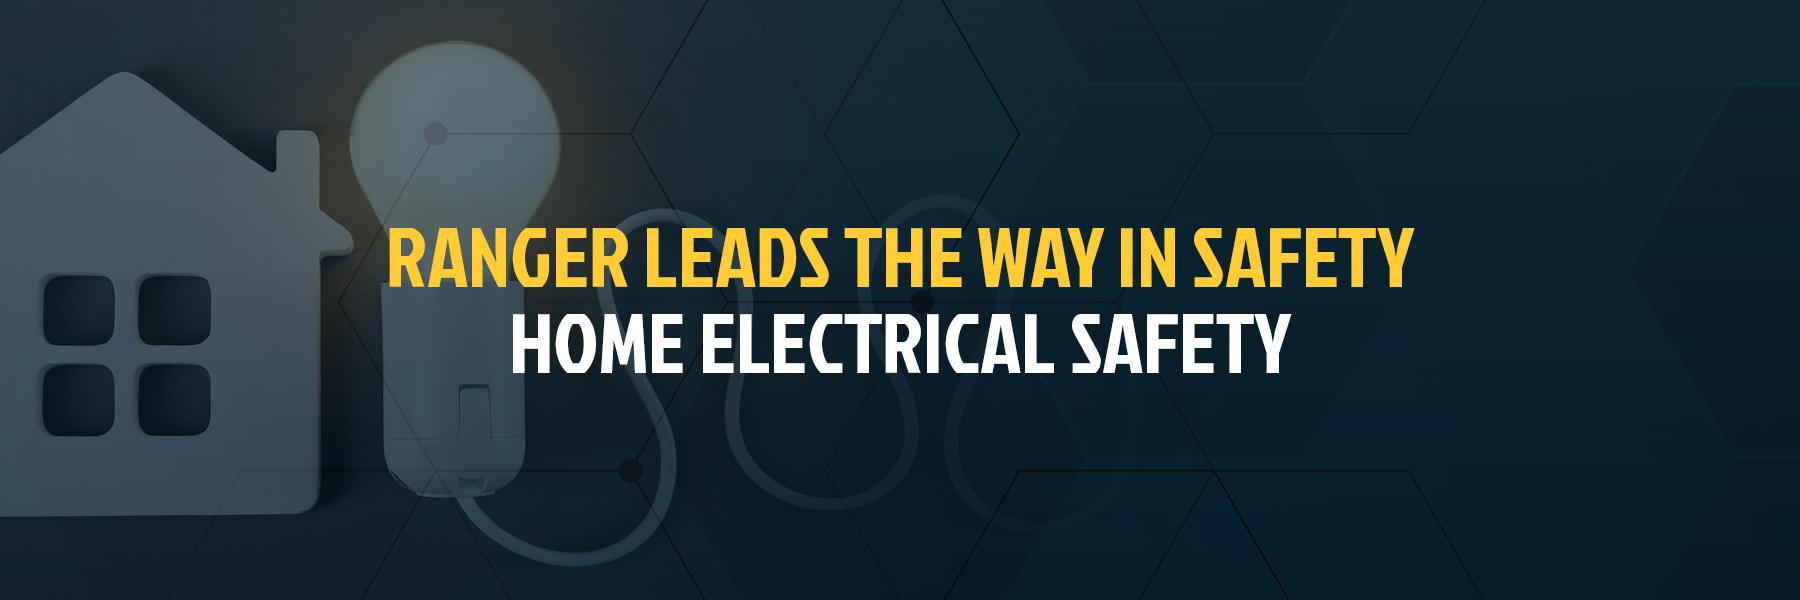 safety moment - electrical safety